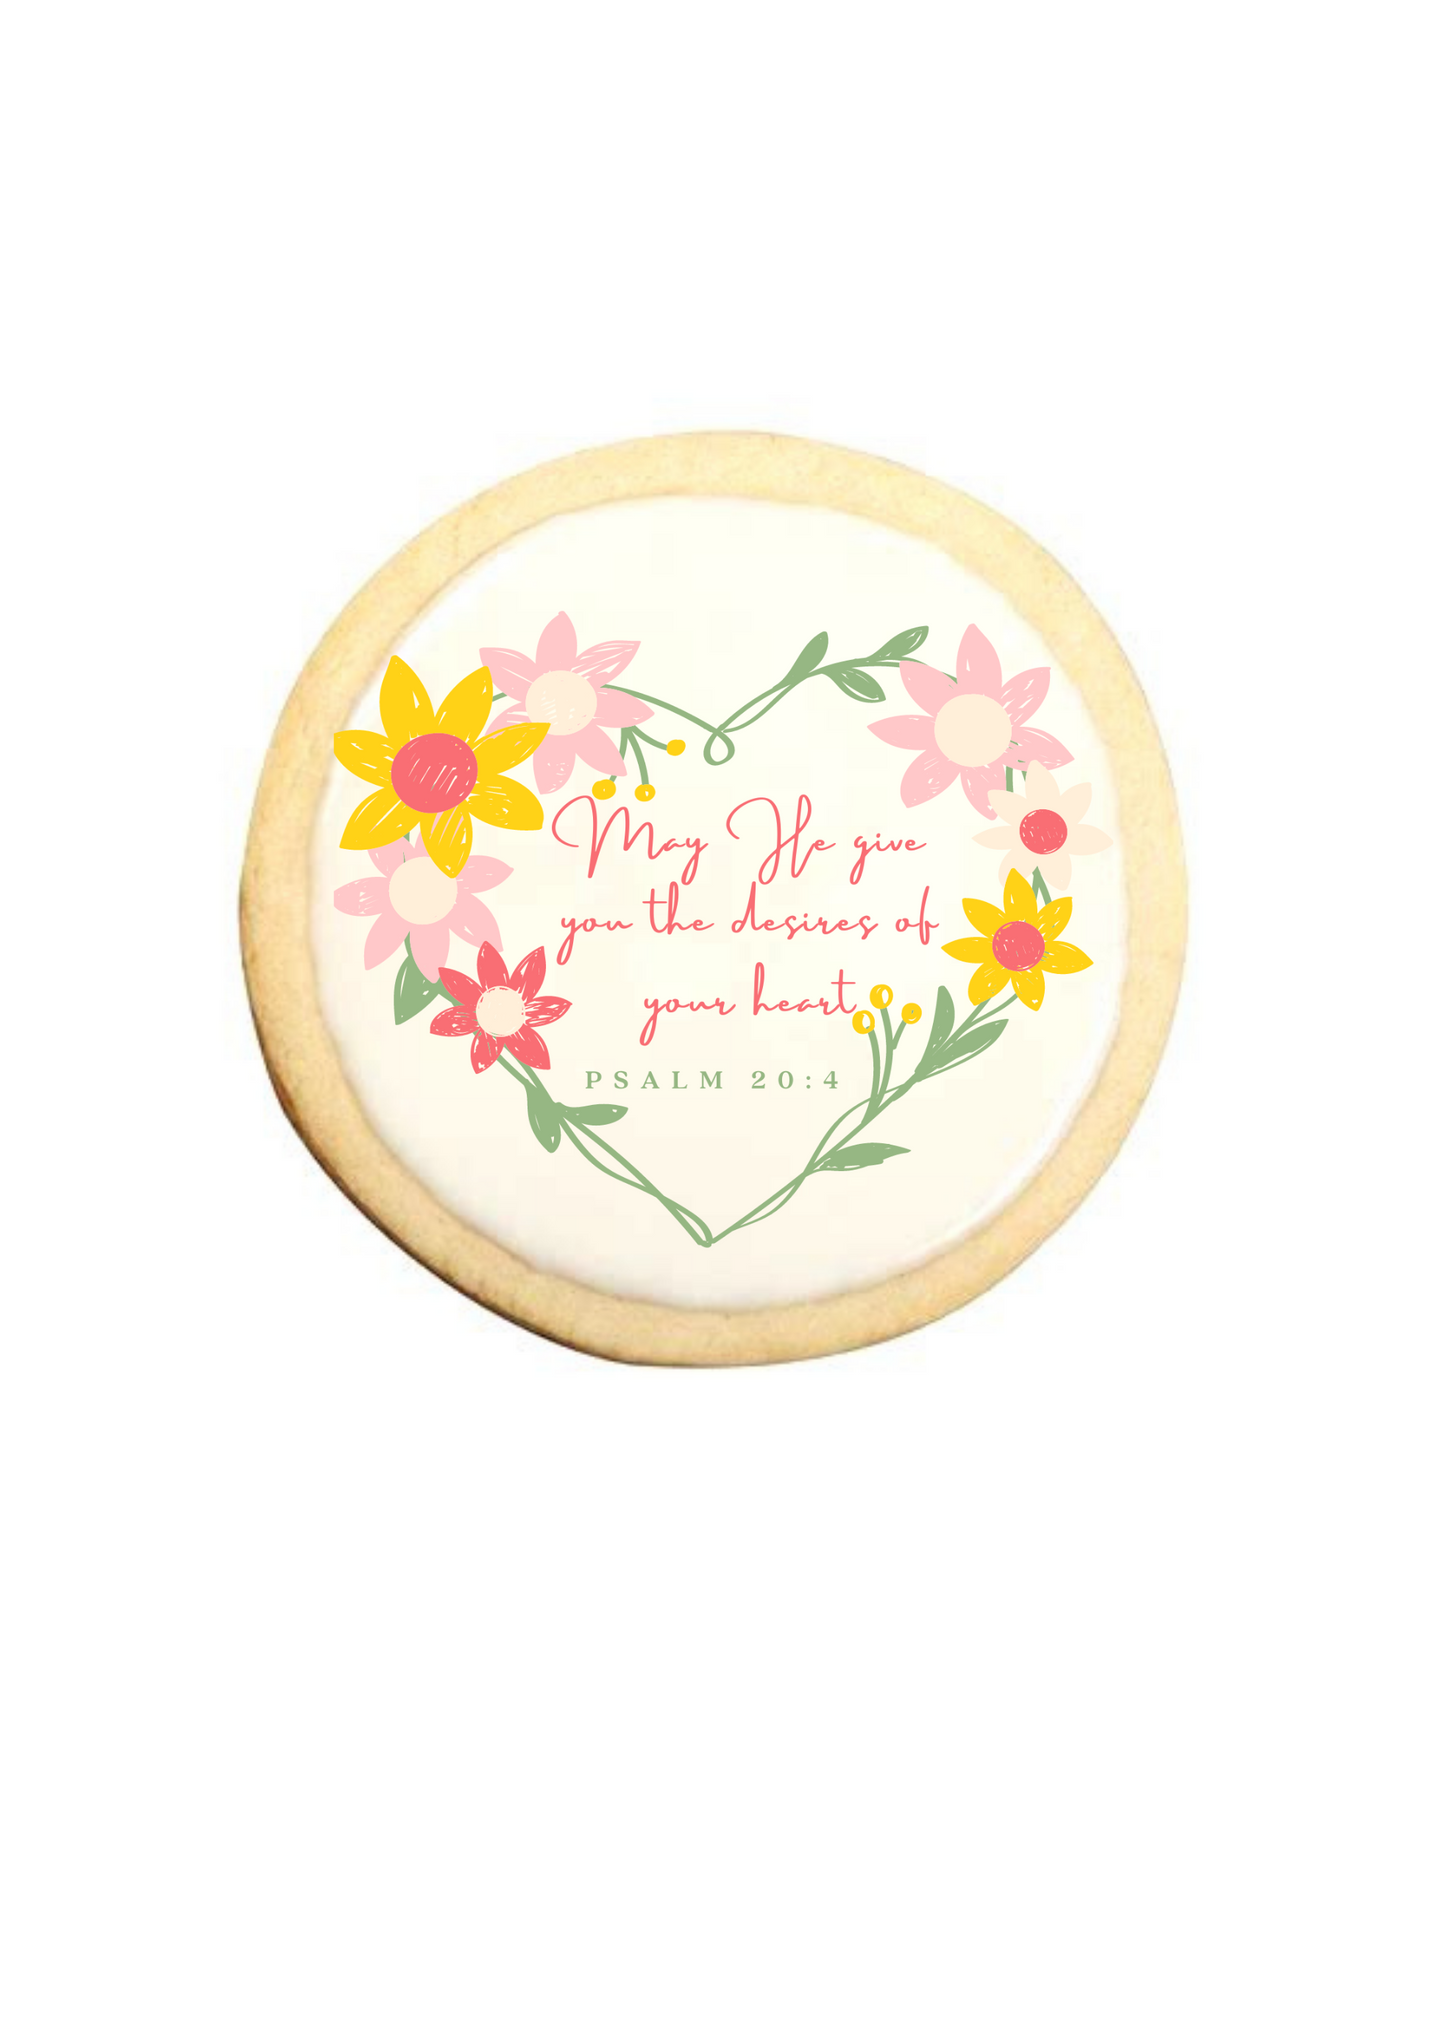 Mother's Day Sugar Cookies Gift Set 6-Pack